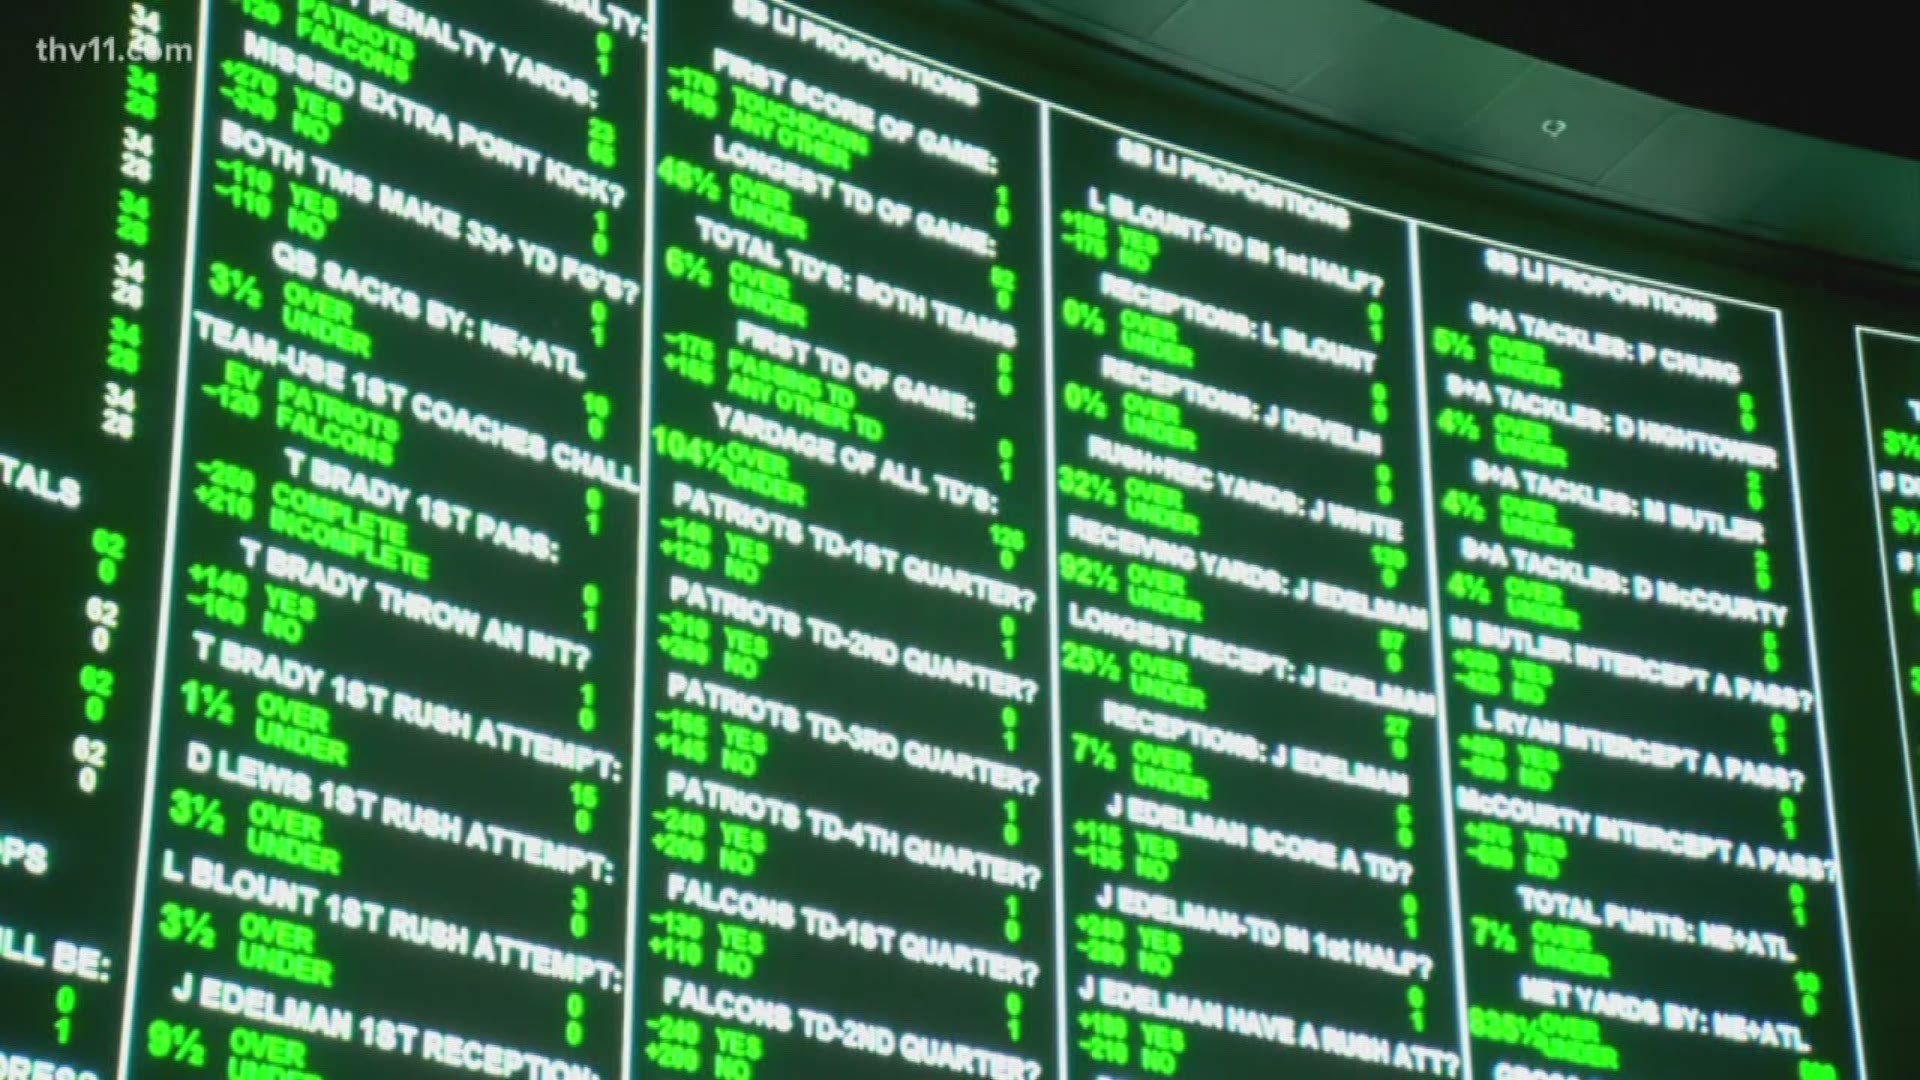 What's next for Arkansas after federal sports betting ban ends?